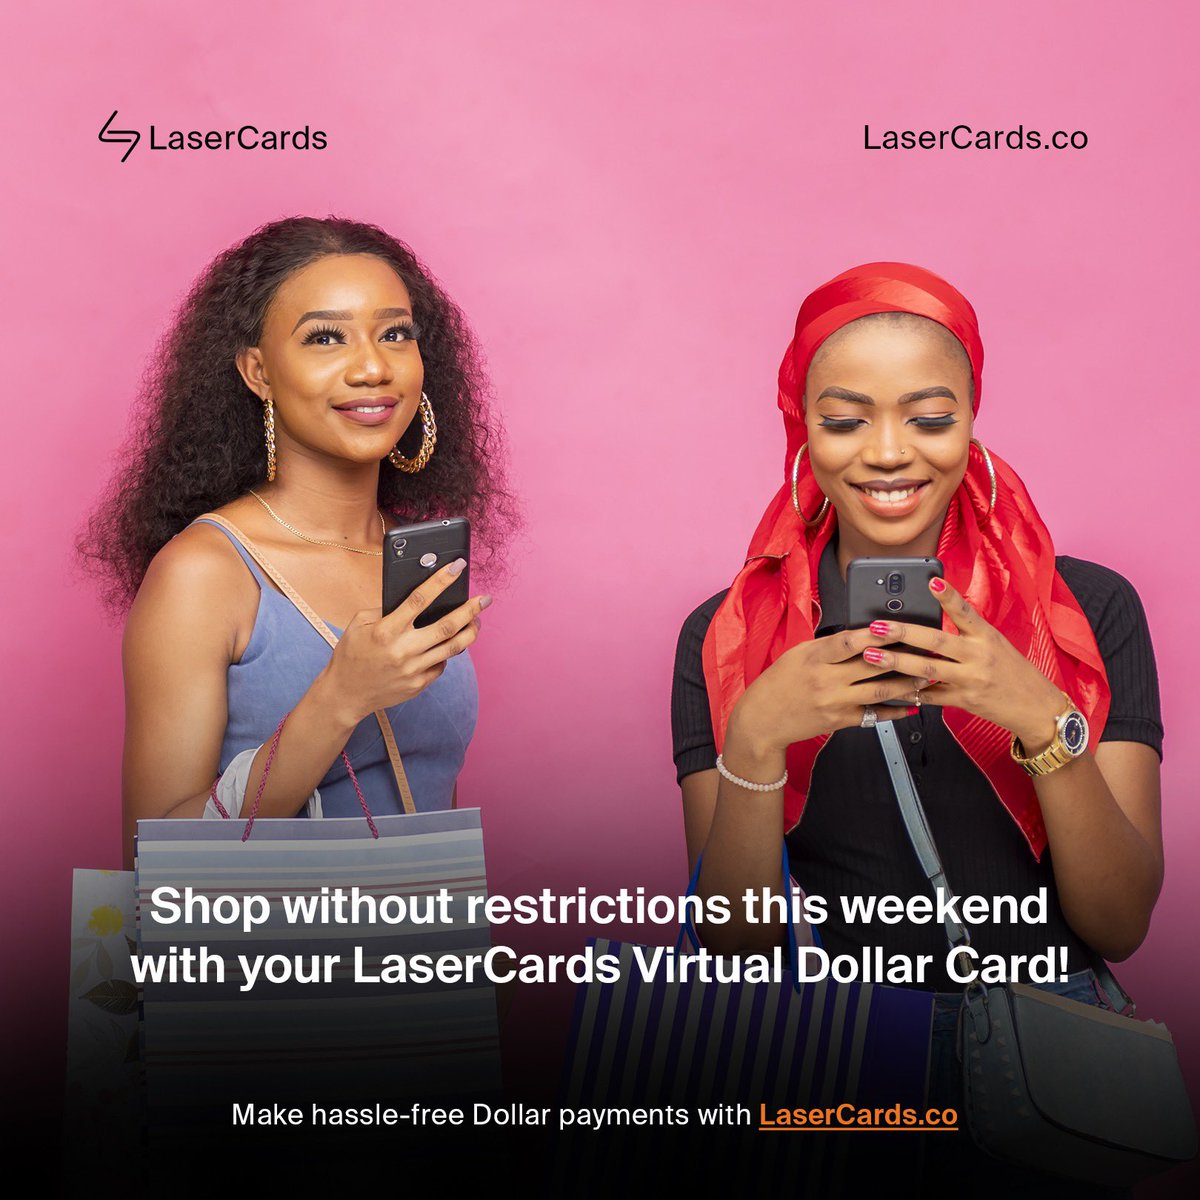 It’s the weekend; the perfect time to reward yourself! 🥂🛍️

Tap the follow button to follow @lasercardsco for more valuable financial tips, deals and seamless payment solutions.

#LaserCardsCo #LaserCards #VirtualDollarCards #VirtualPayments #OnlinePayments #DollarCards